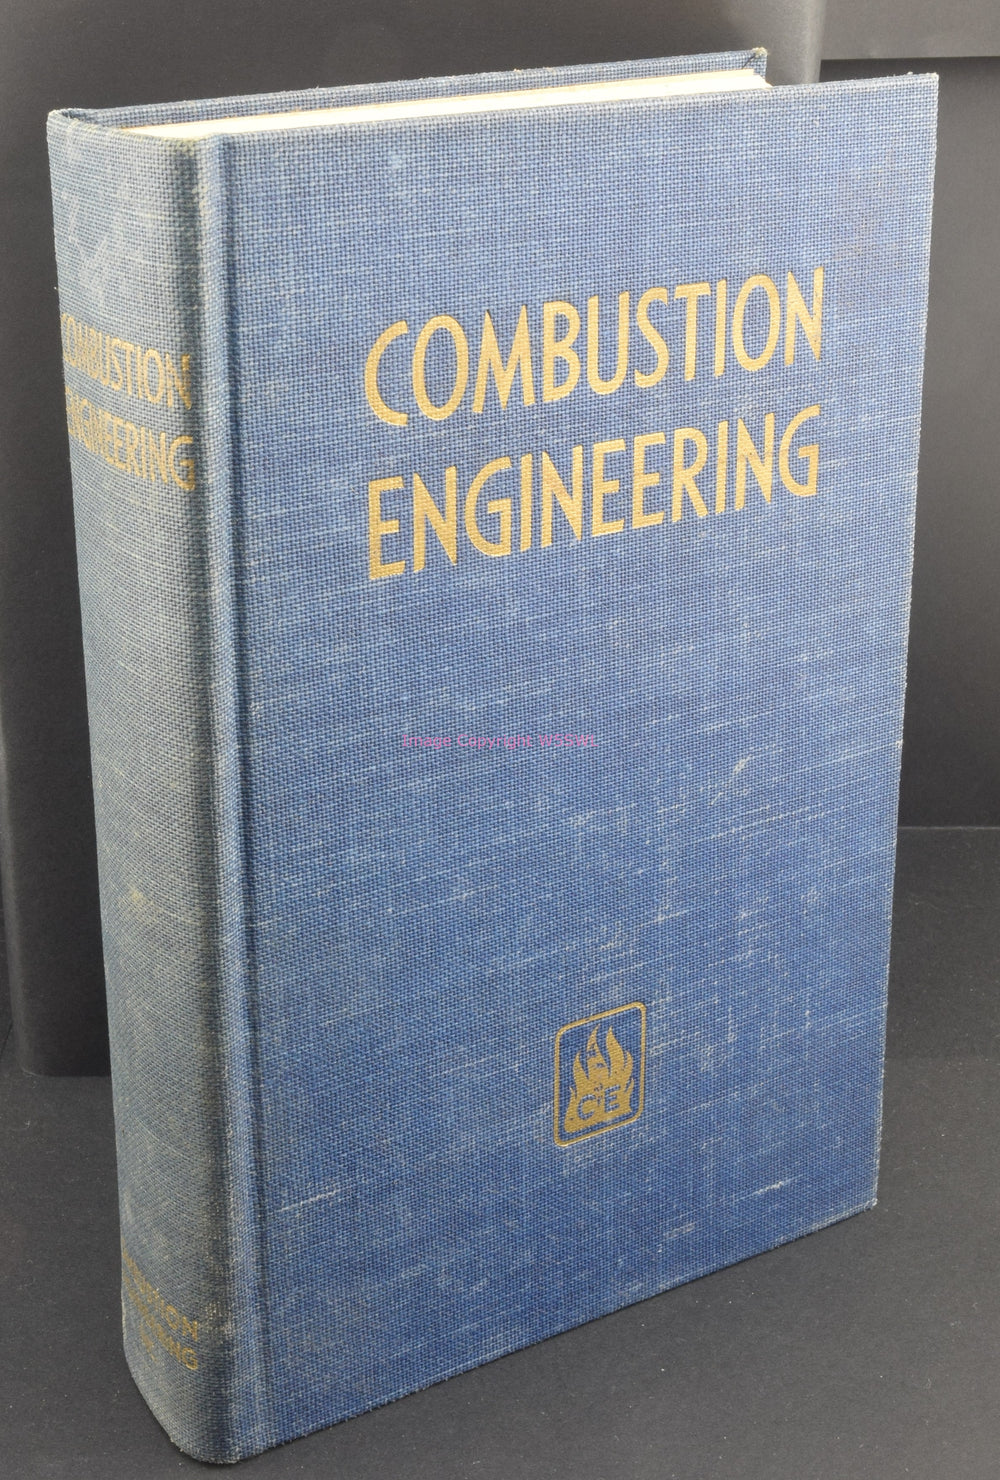 Combustion Engineering - Dave's Hobby Shop by W5SWL